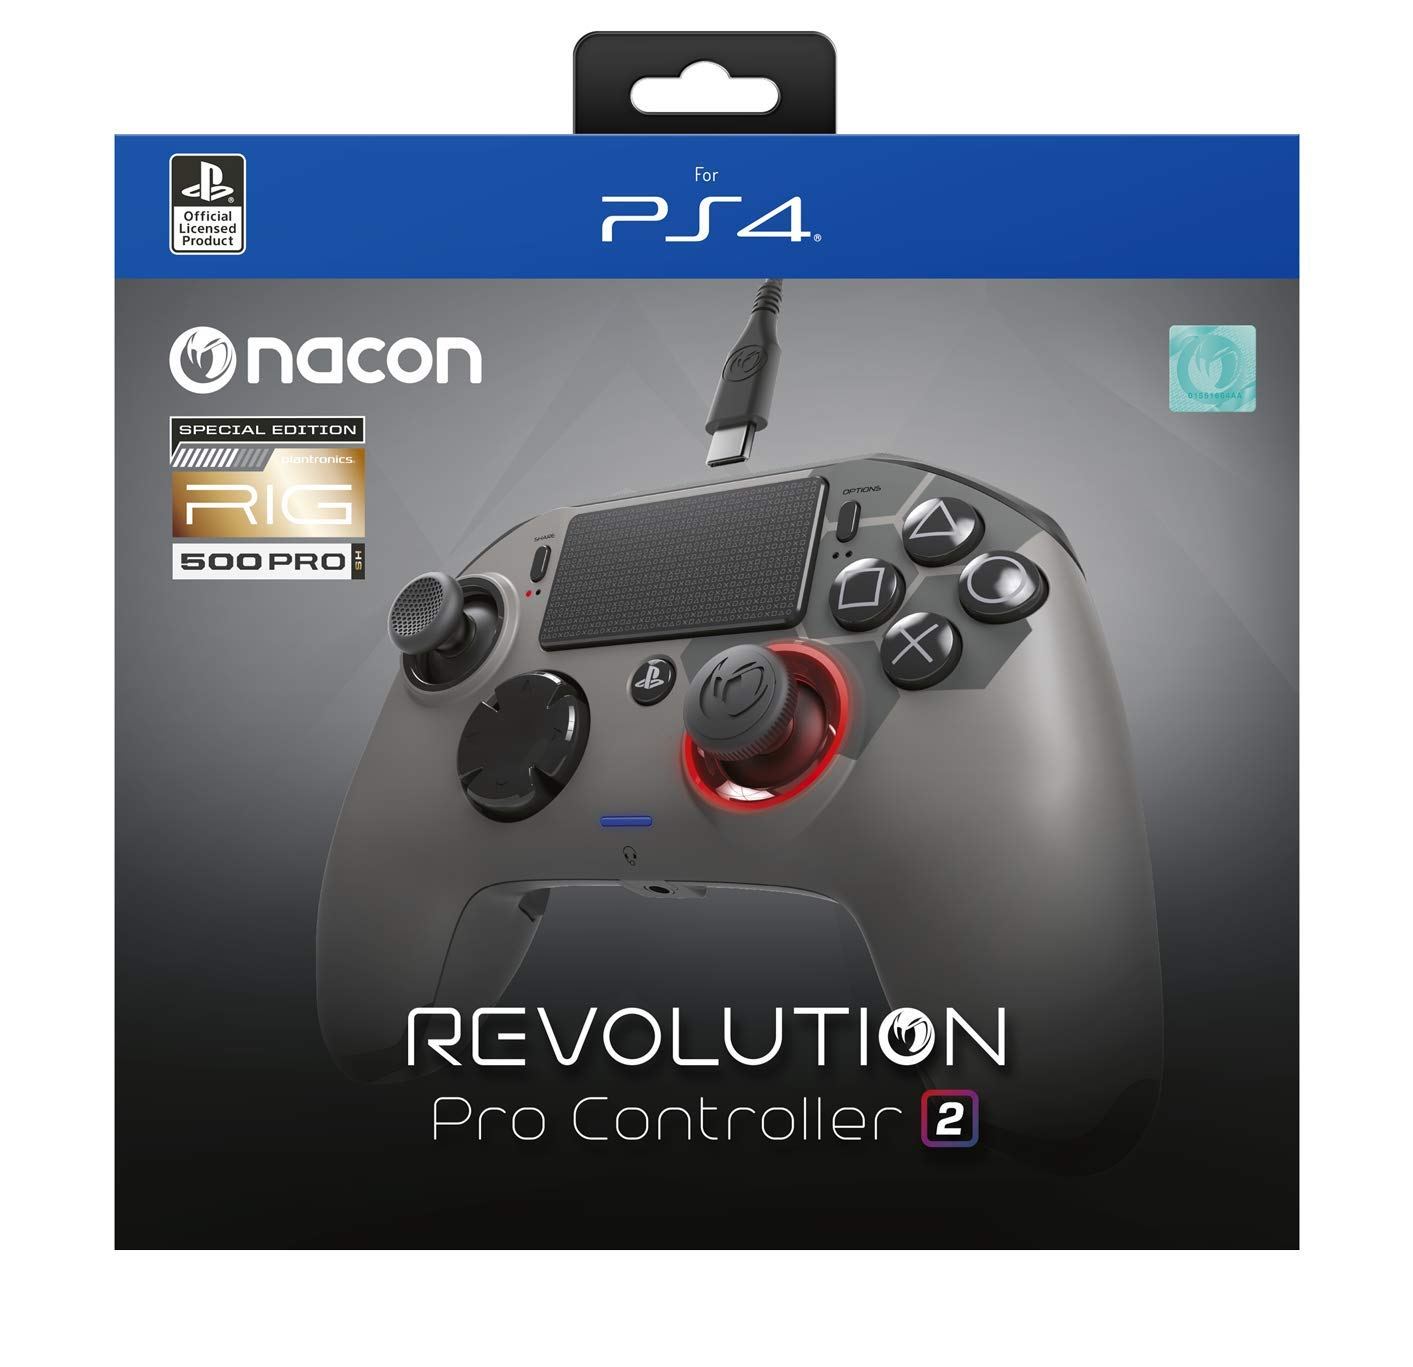 Nacon Revolution Pro Controller 2 for PlayStation 4 (Rig Limited Edition)  for Windows, PlayStation 4, Playstation 4 Pro